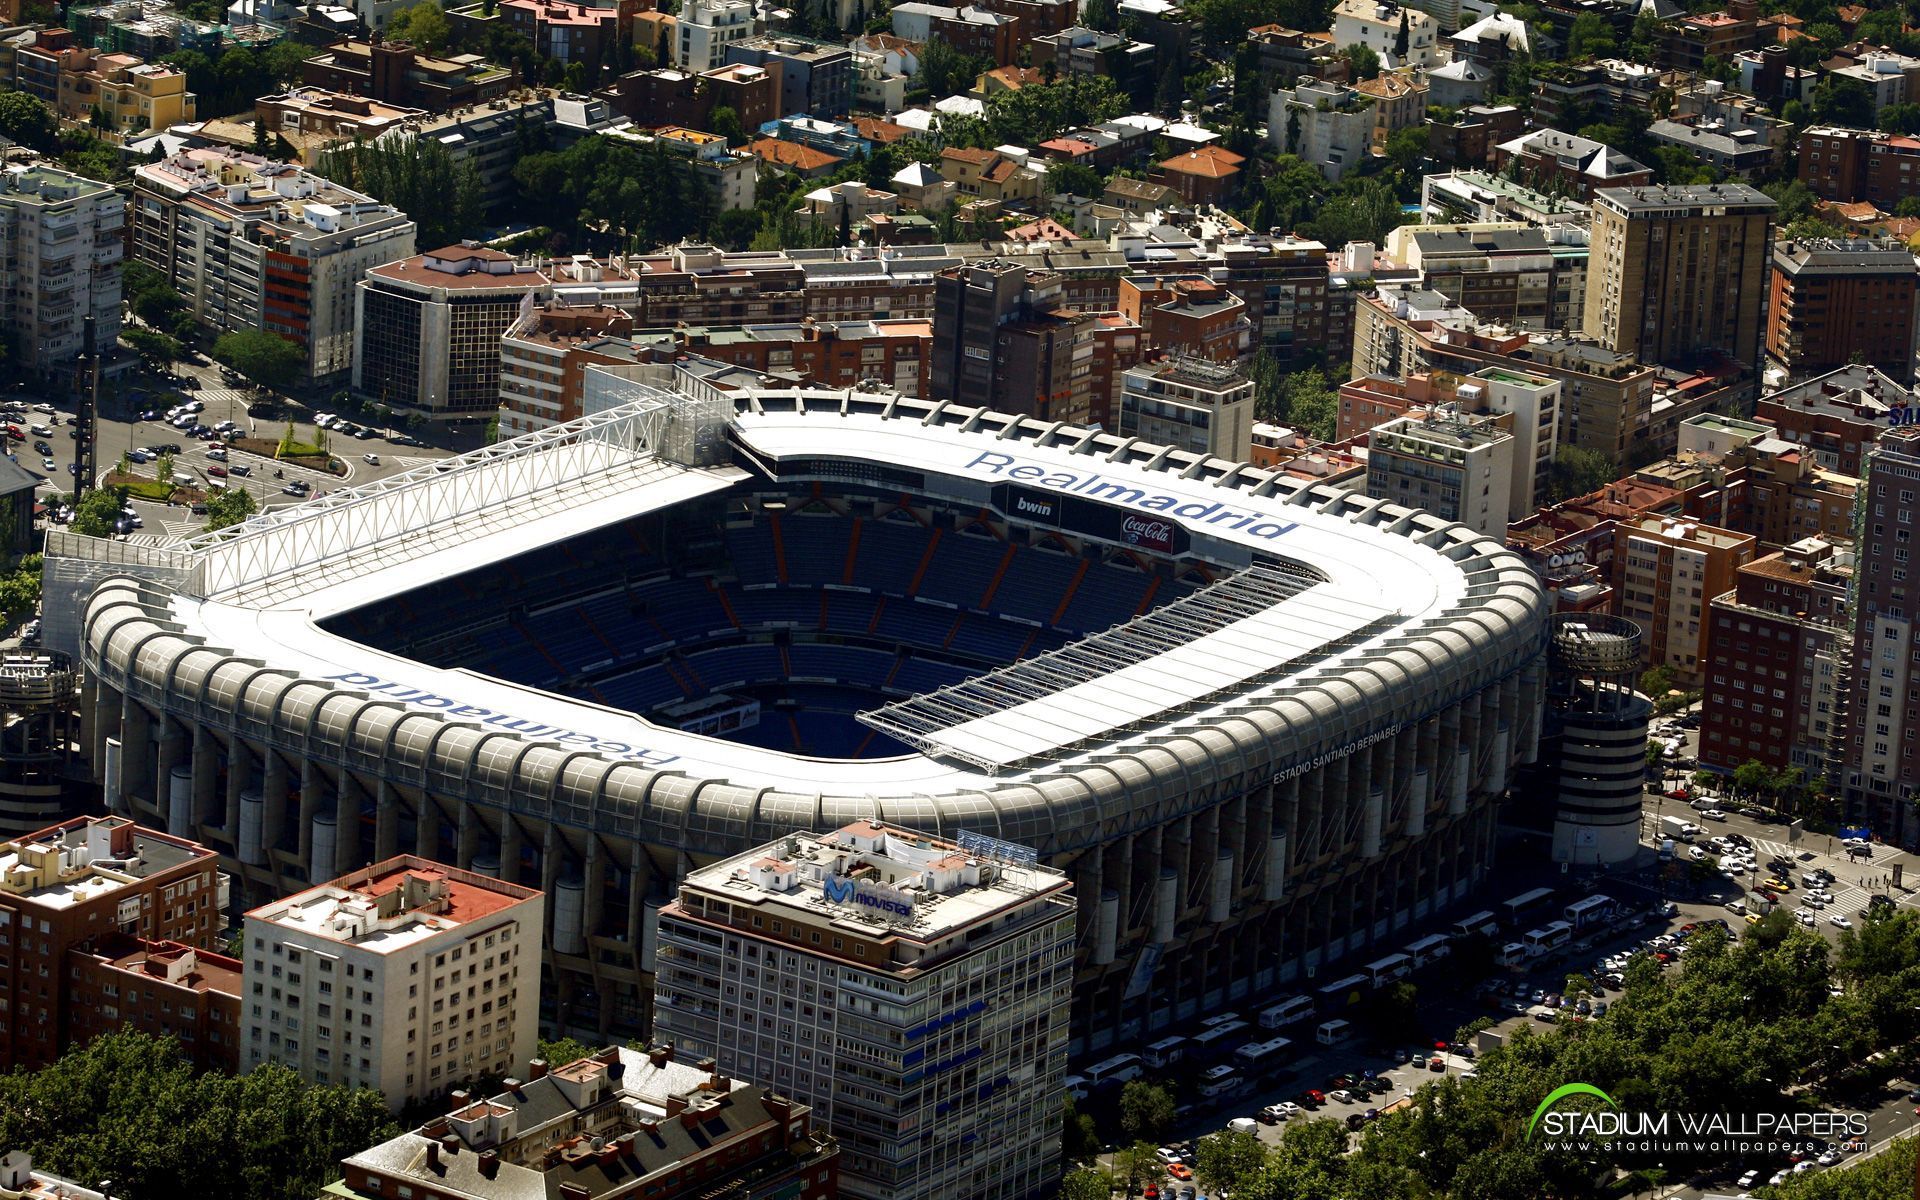 Real Madrid Stadium wallpapers hd | Wallpapers, Backgrounds ...